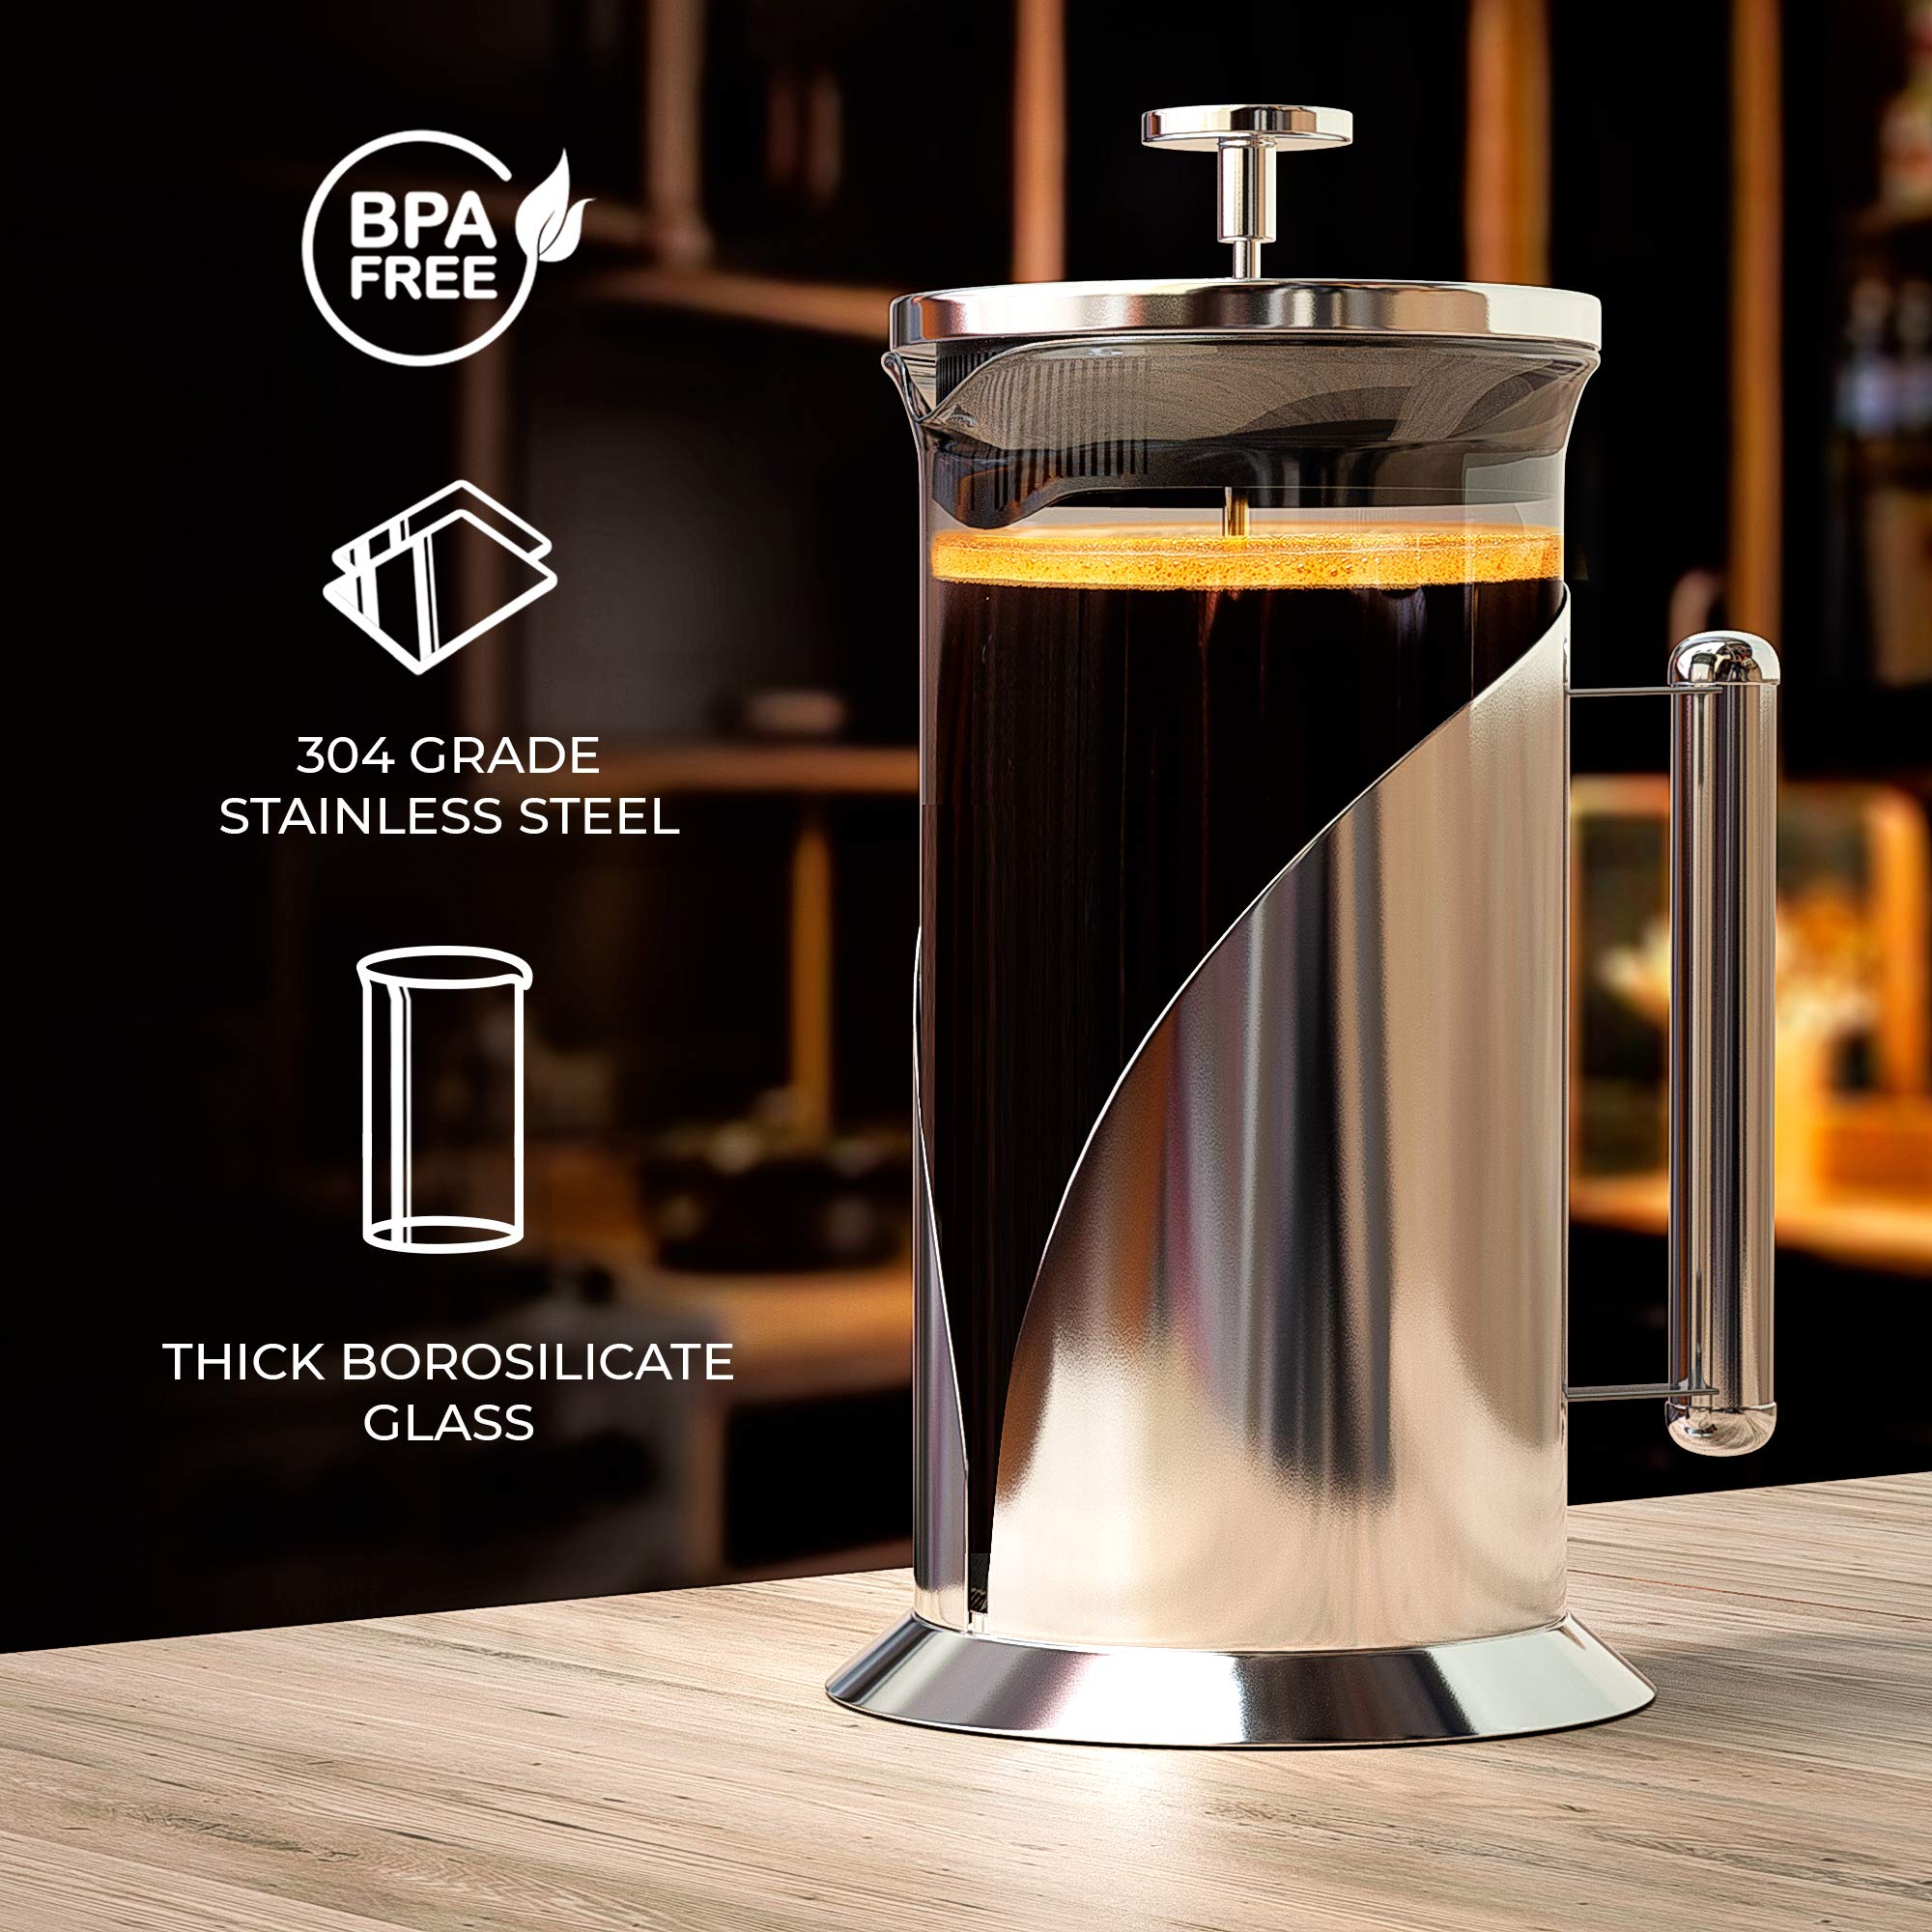  French Press Coffee Maker - 304 Grade Stainless Steel